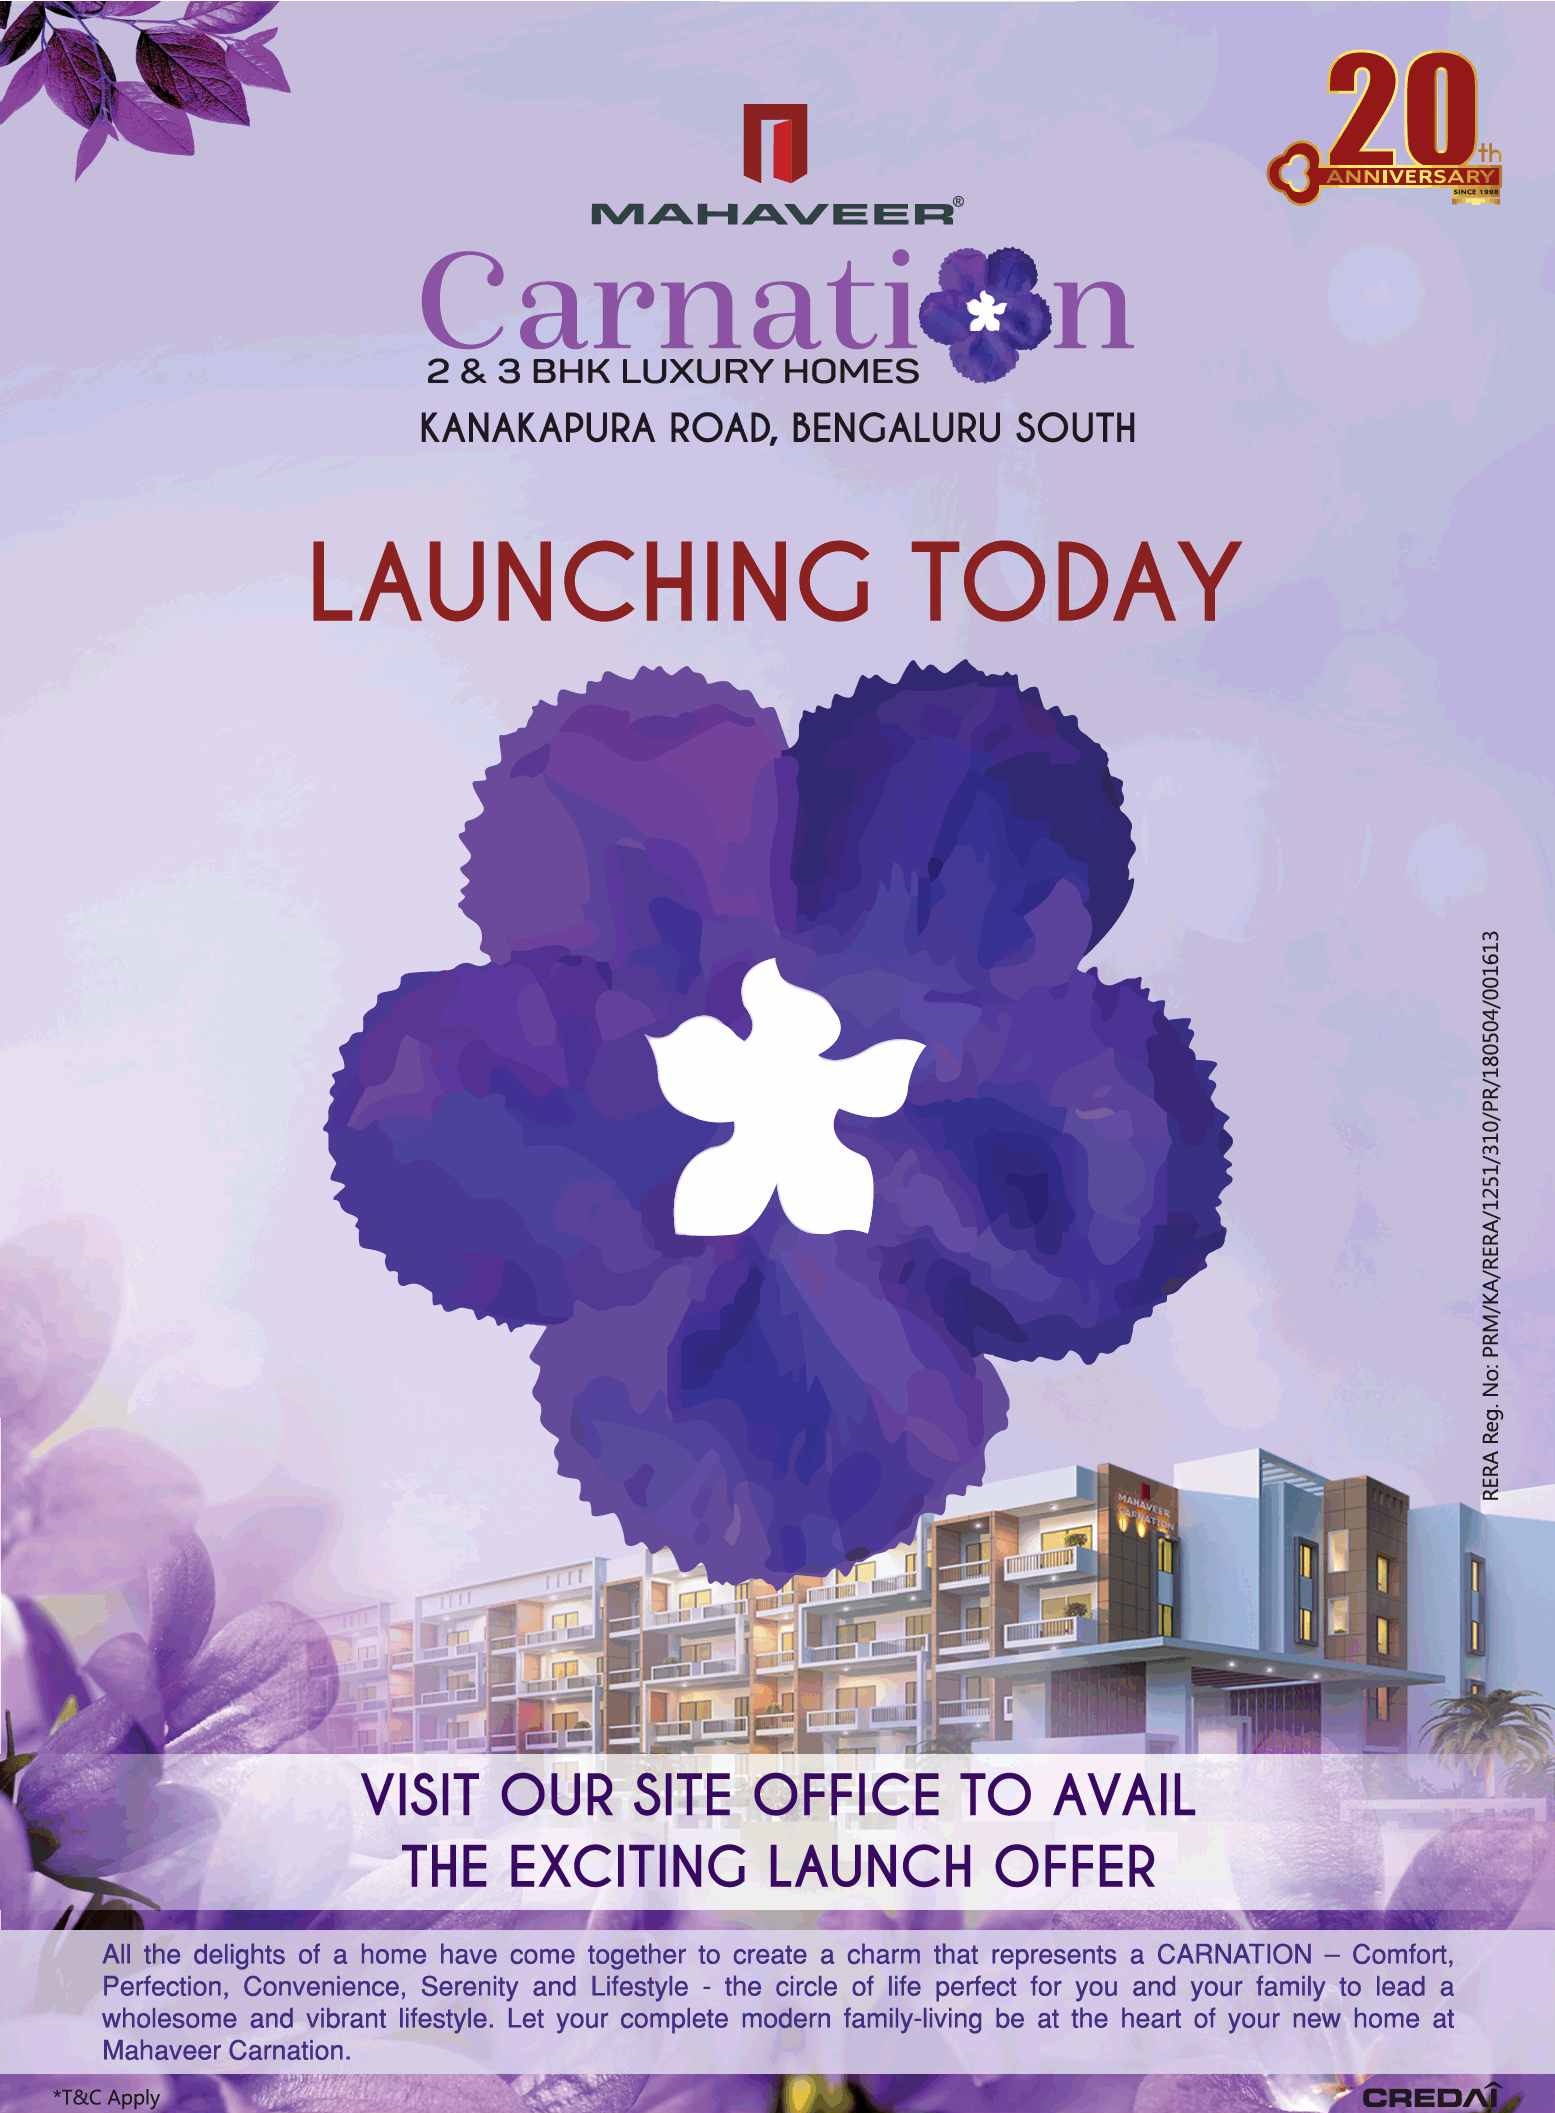 Book 2 & 3 BHK Luxury Homes at Mahaveer Carnation in Bangalore